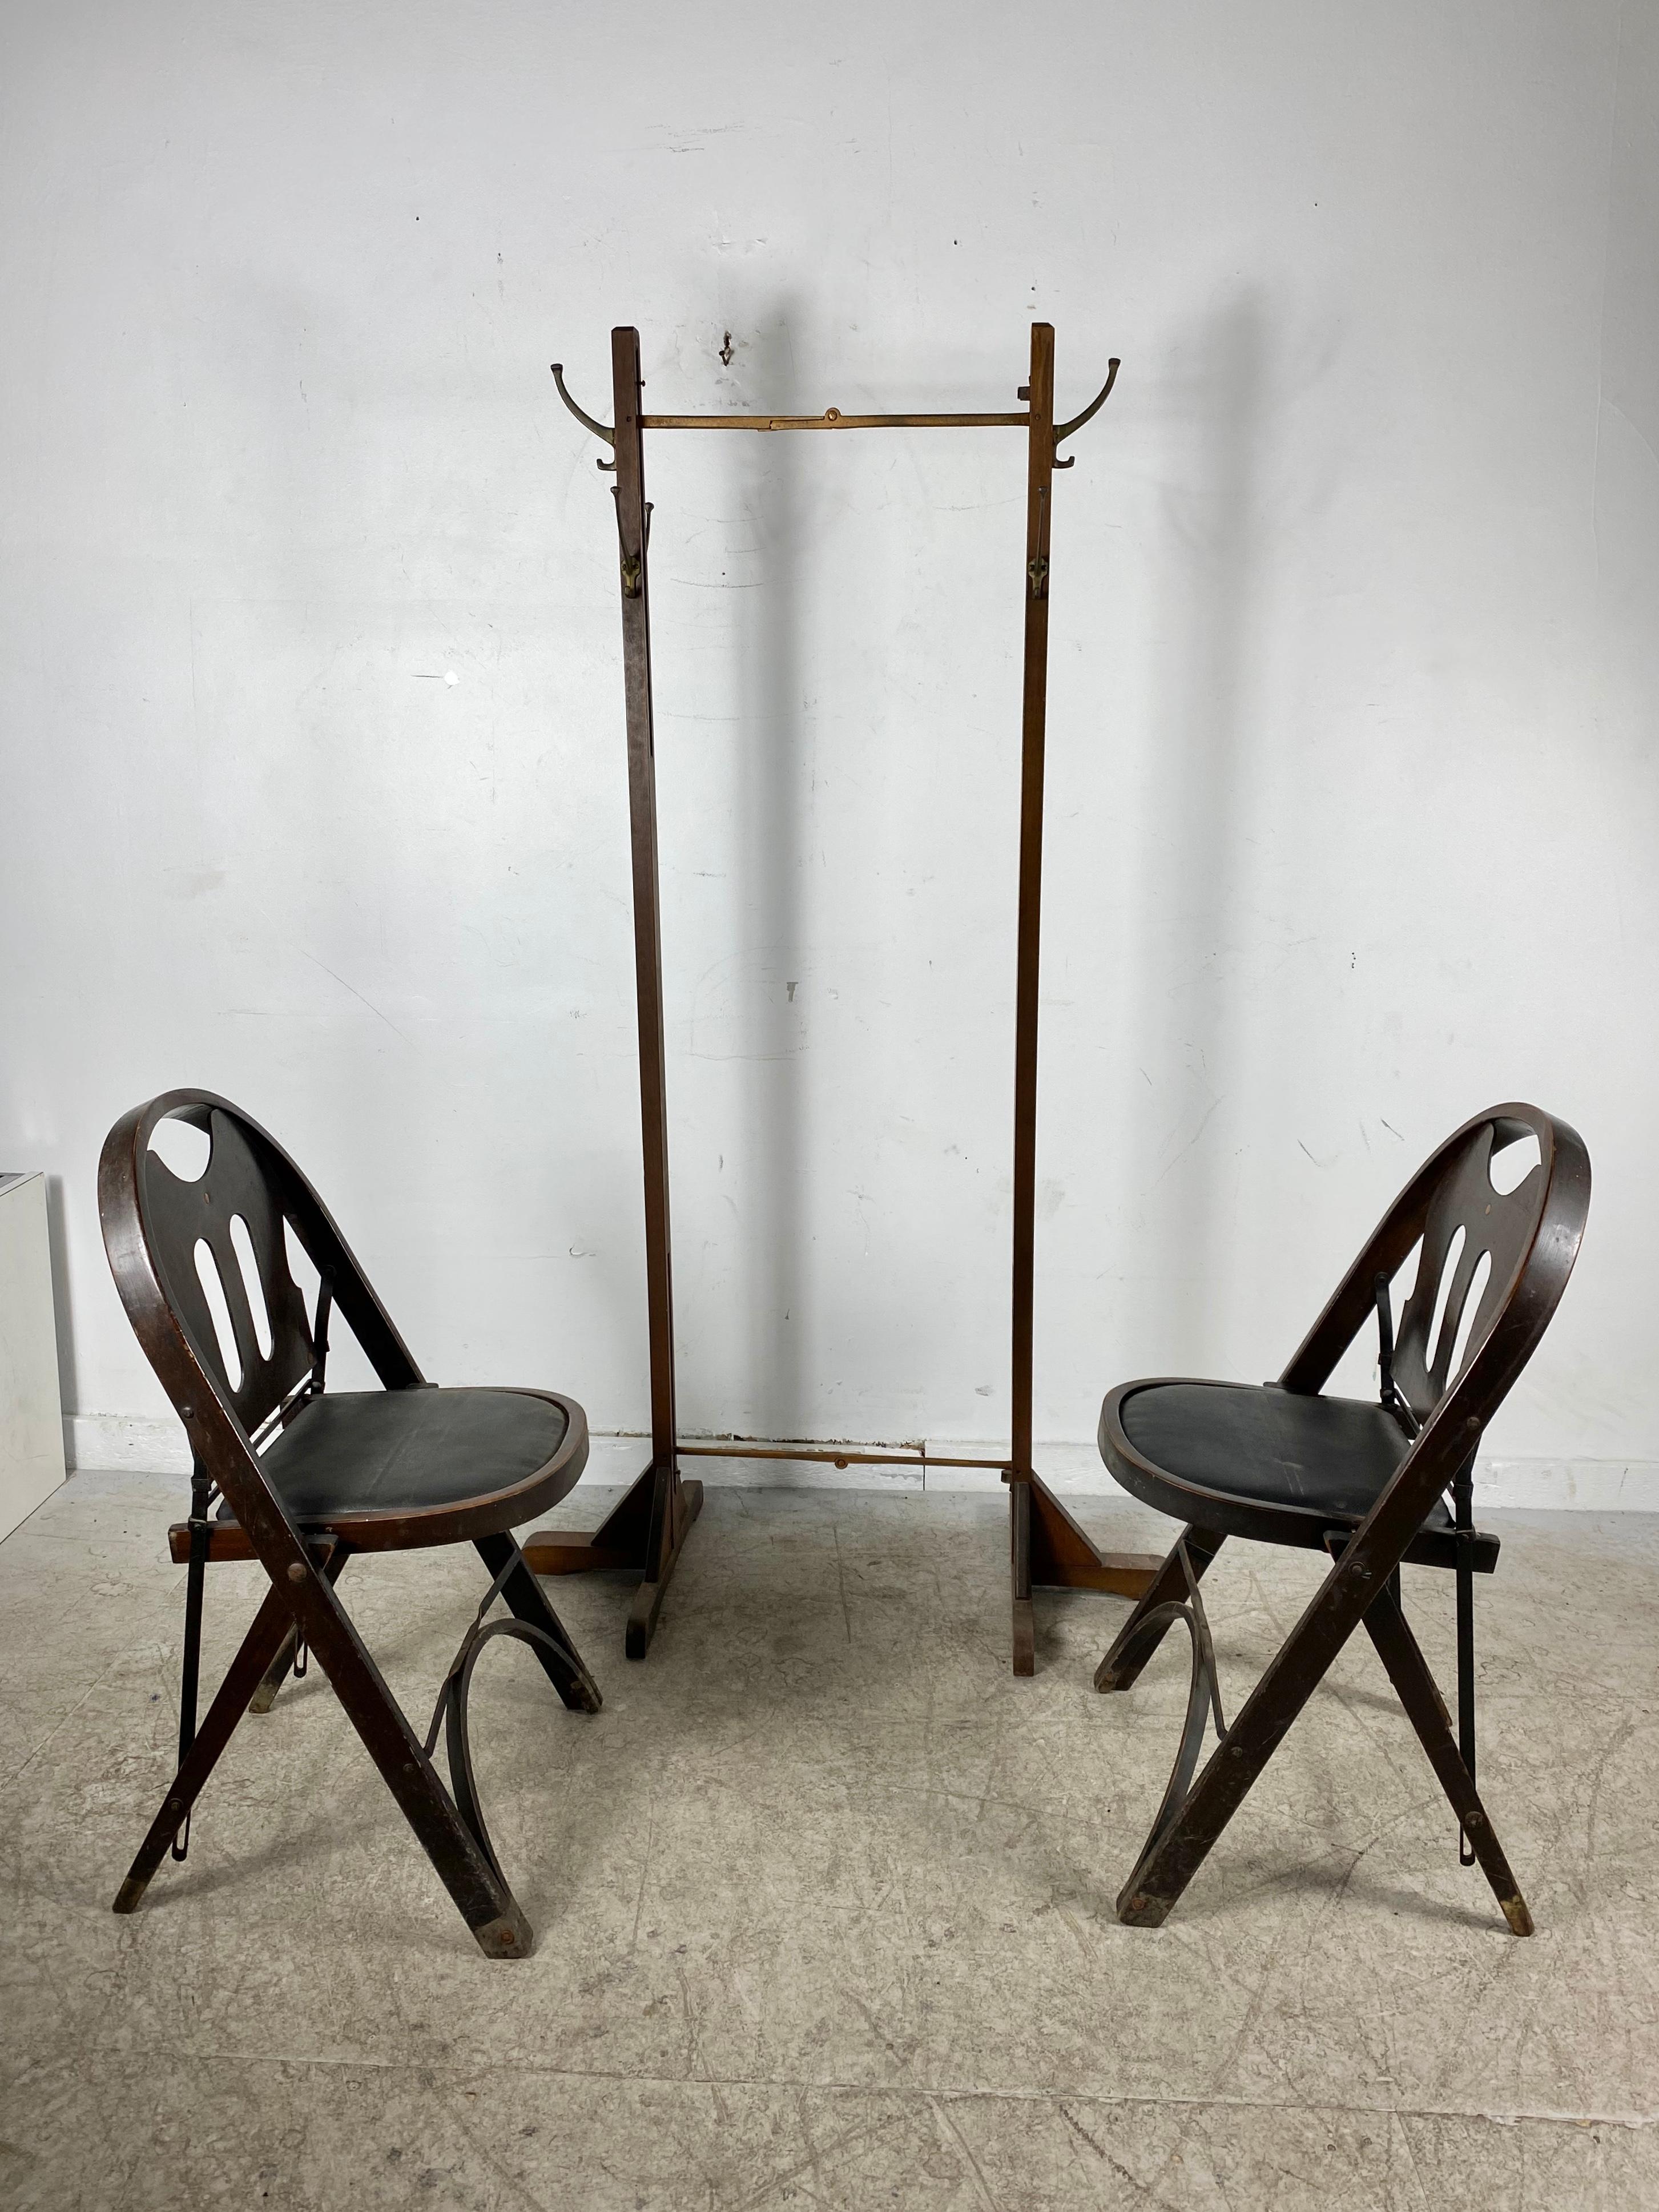 Louis Rostetter & Sons Turn of the Century Industrial Folding Chairs, SFMOMA 1